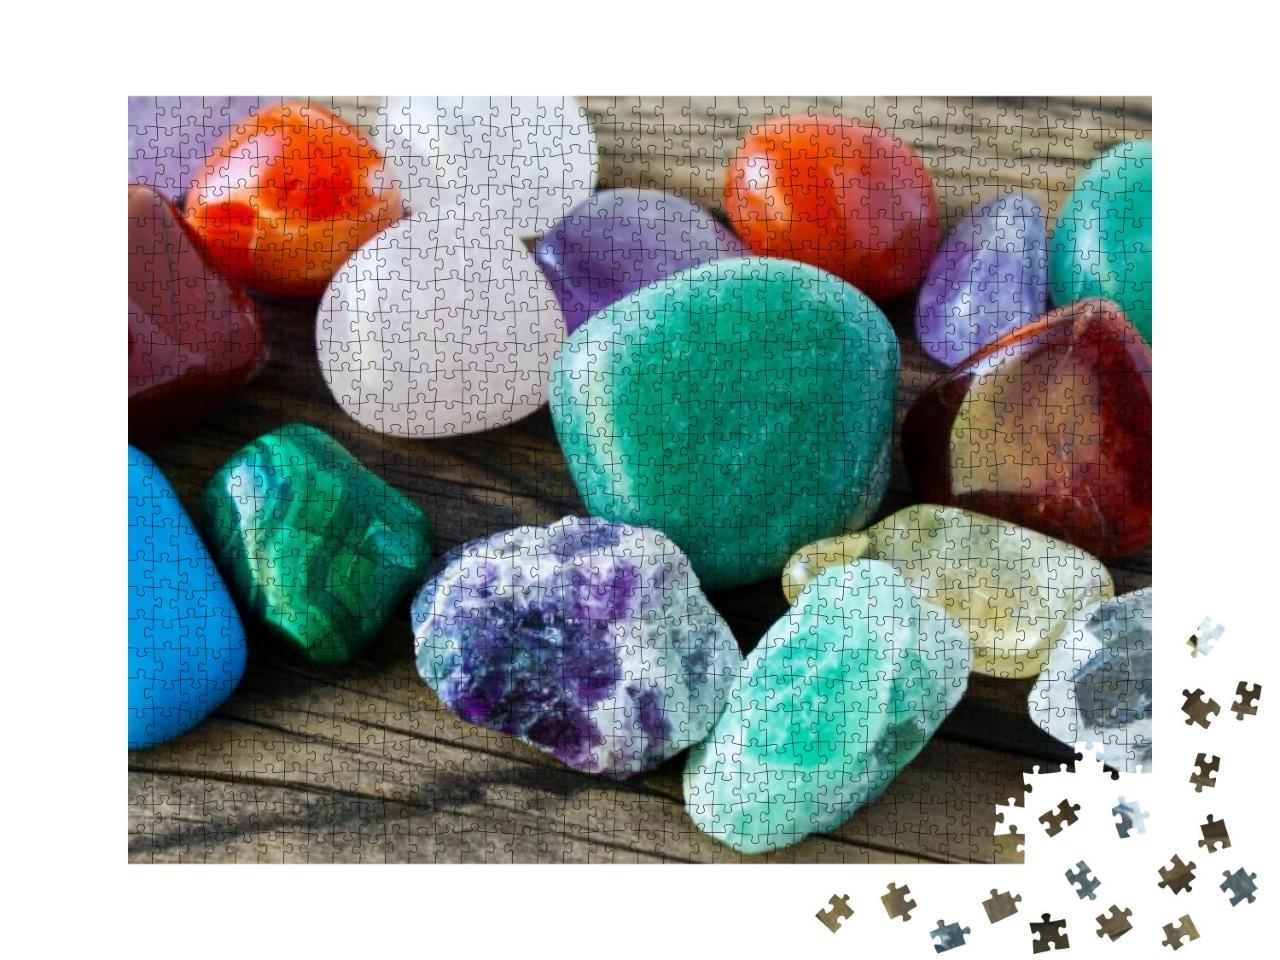 Gemstones Against Wooden Background... Jigsaw Puzzle with 1000 pieces